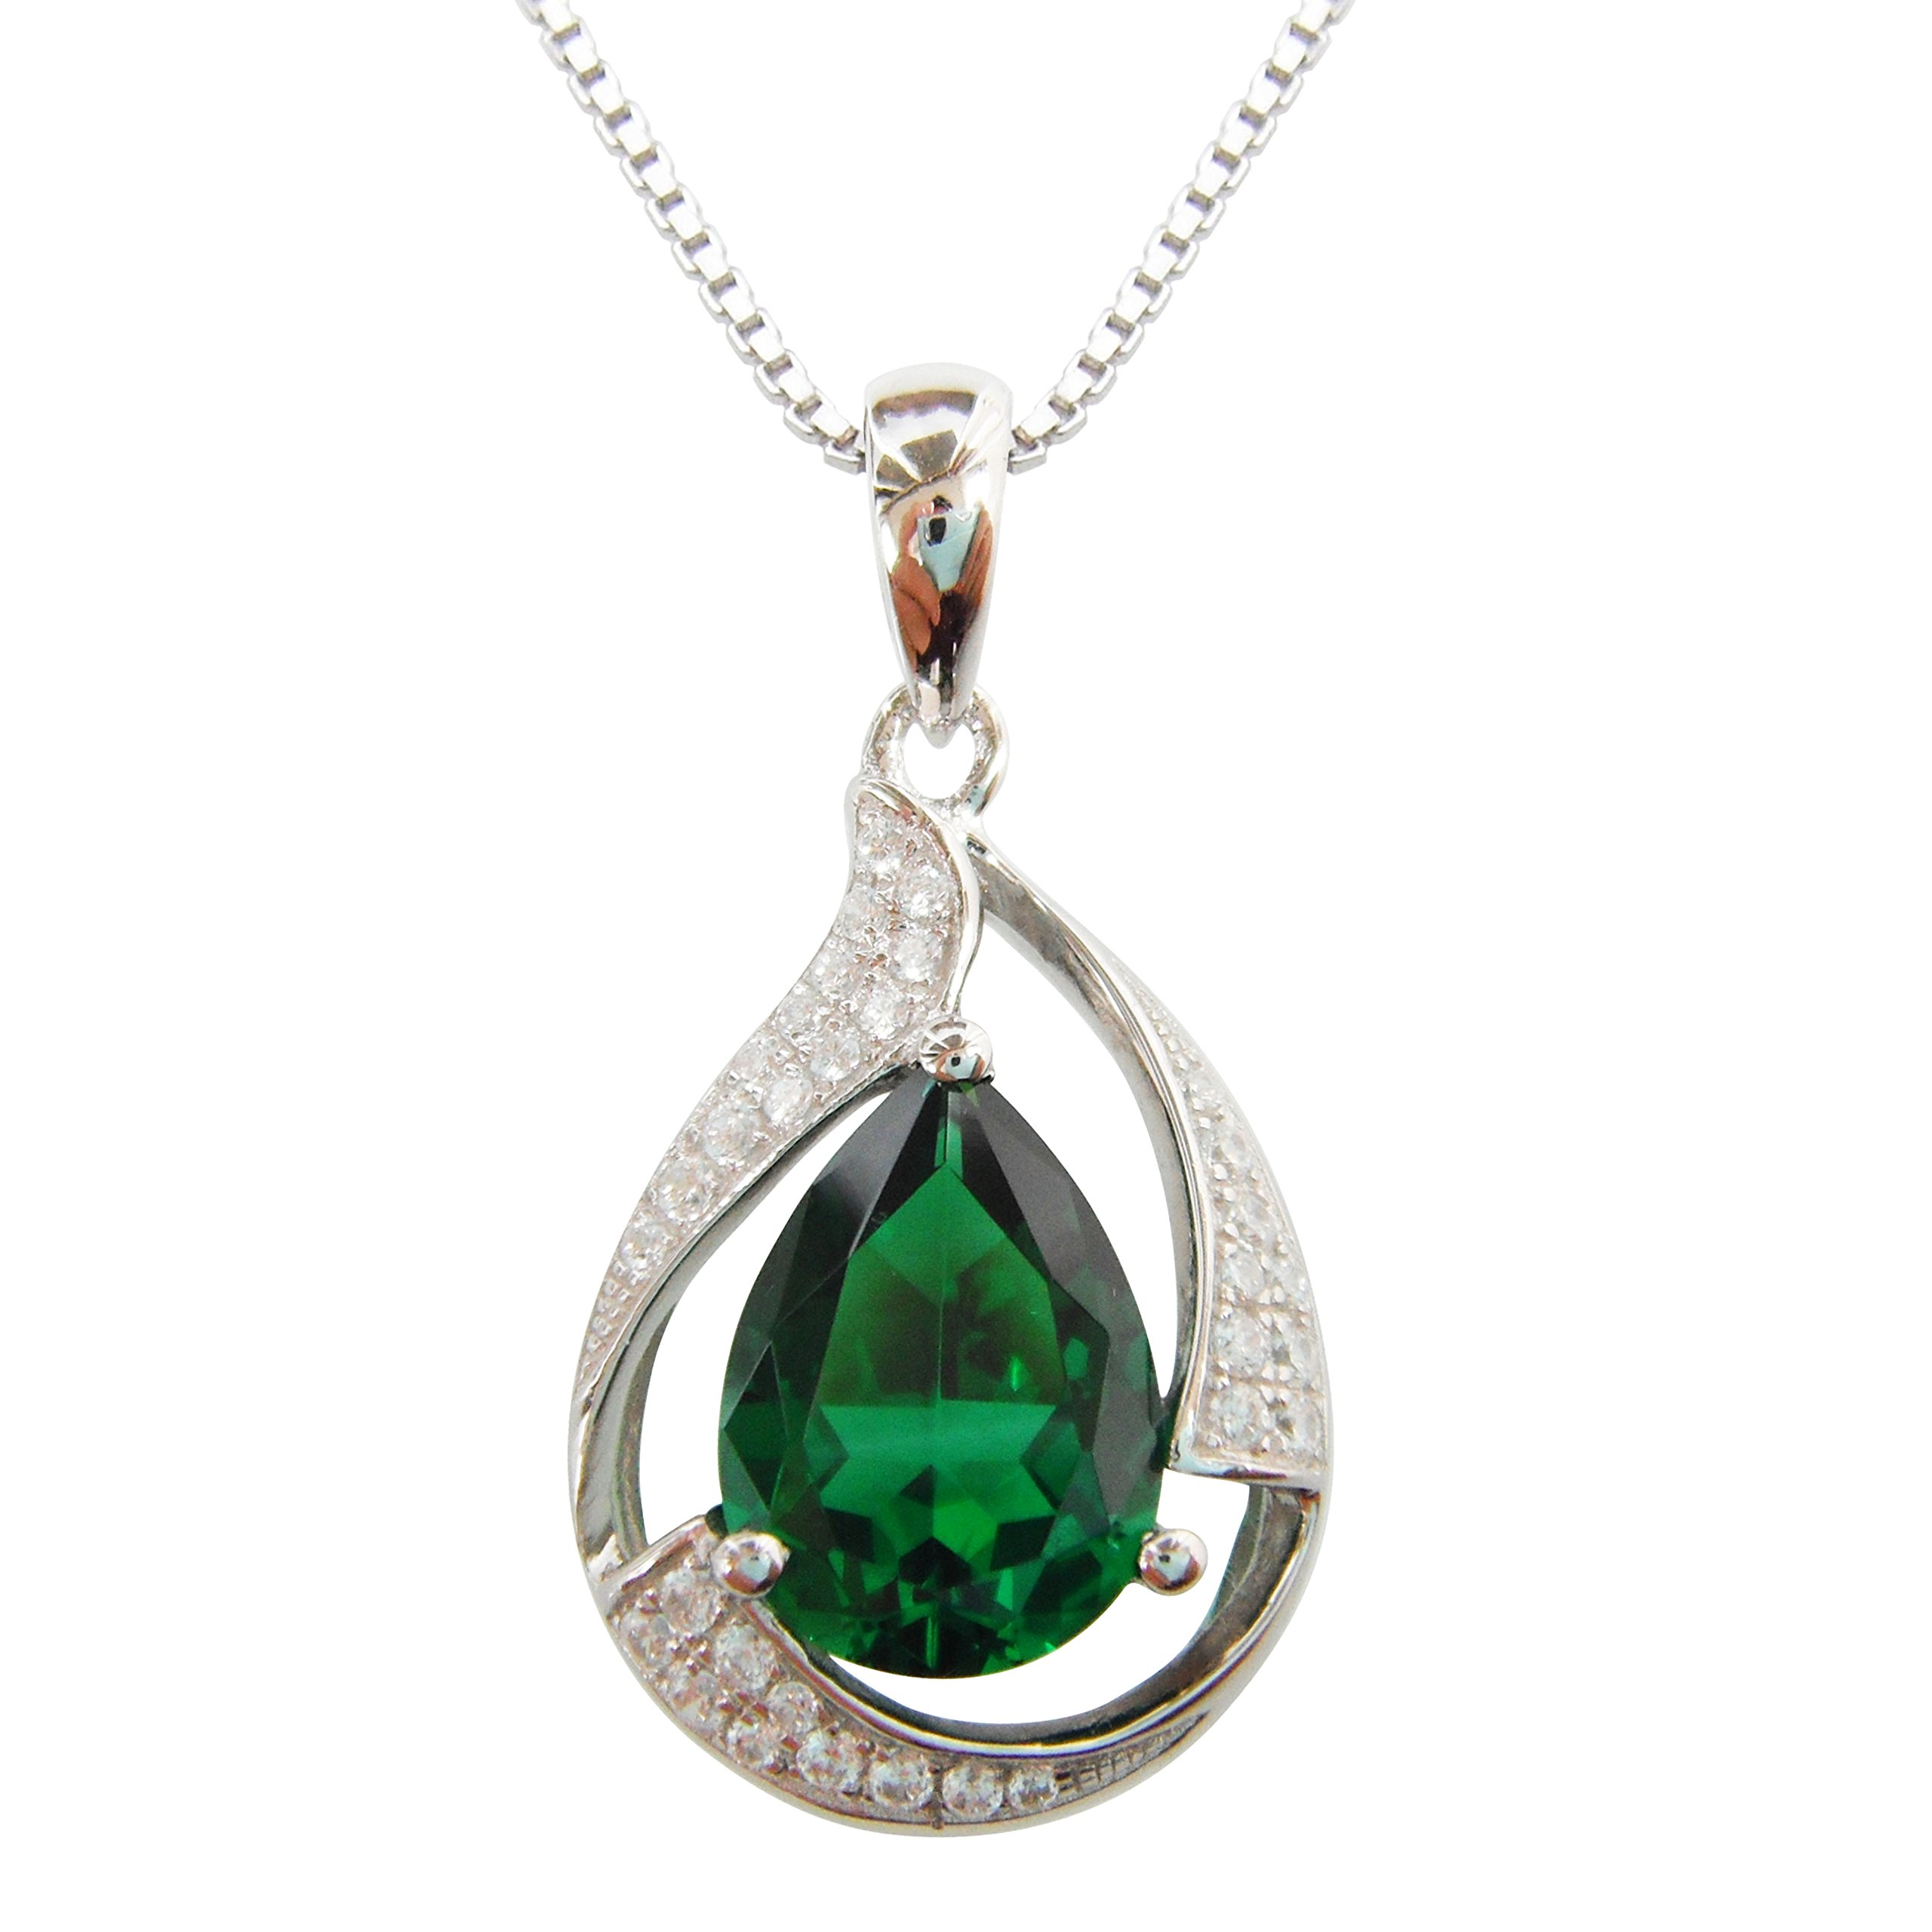 Navachi 925 Sterling Silver 18k White Gold Plated 3.5ct Pear Emerald Or Ruby Necklace Pendant 18